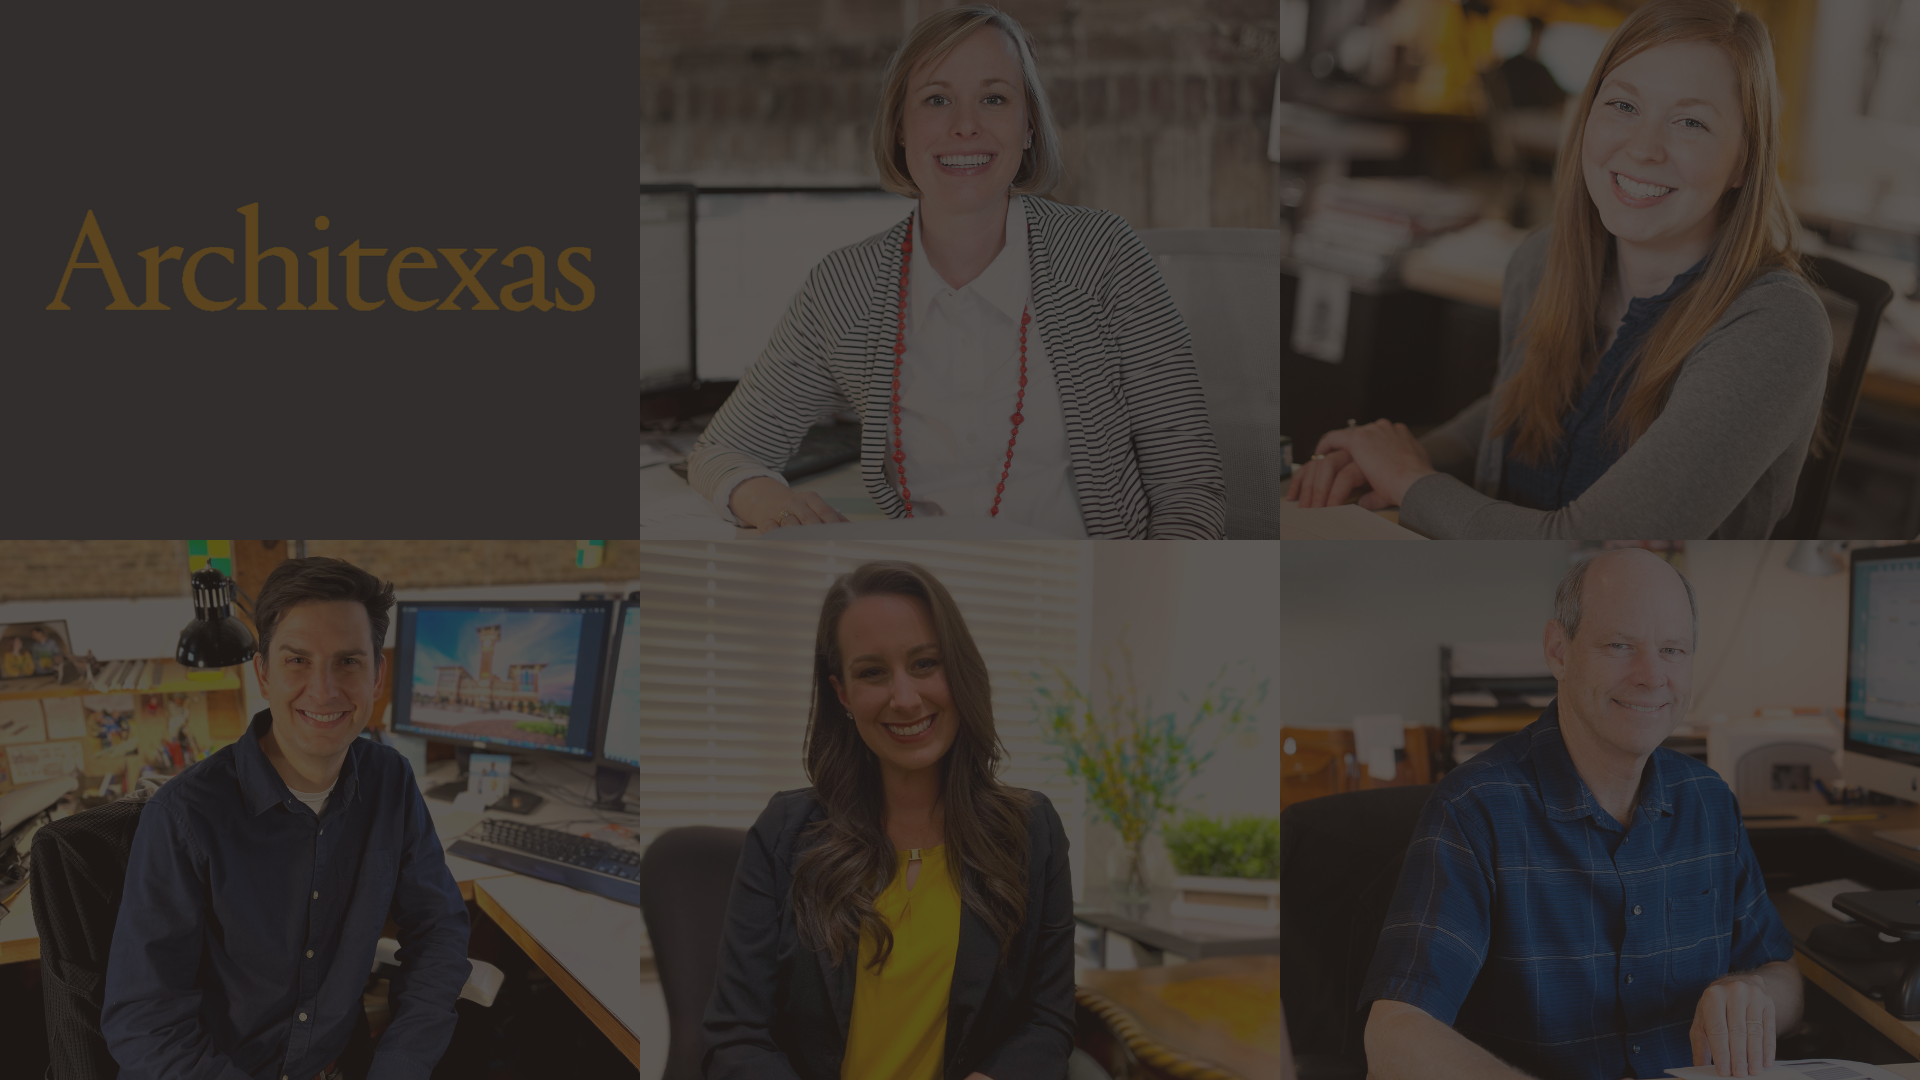 Architexas Extends “Well Wishes” and Celebrates New Leadership